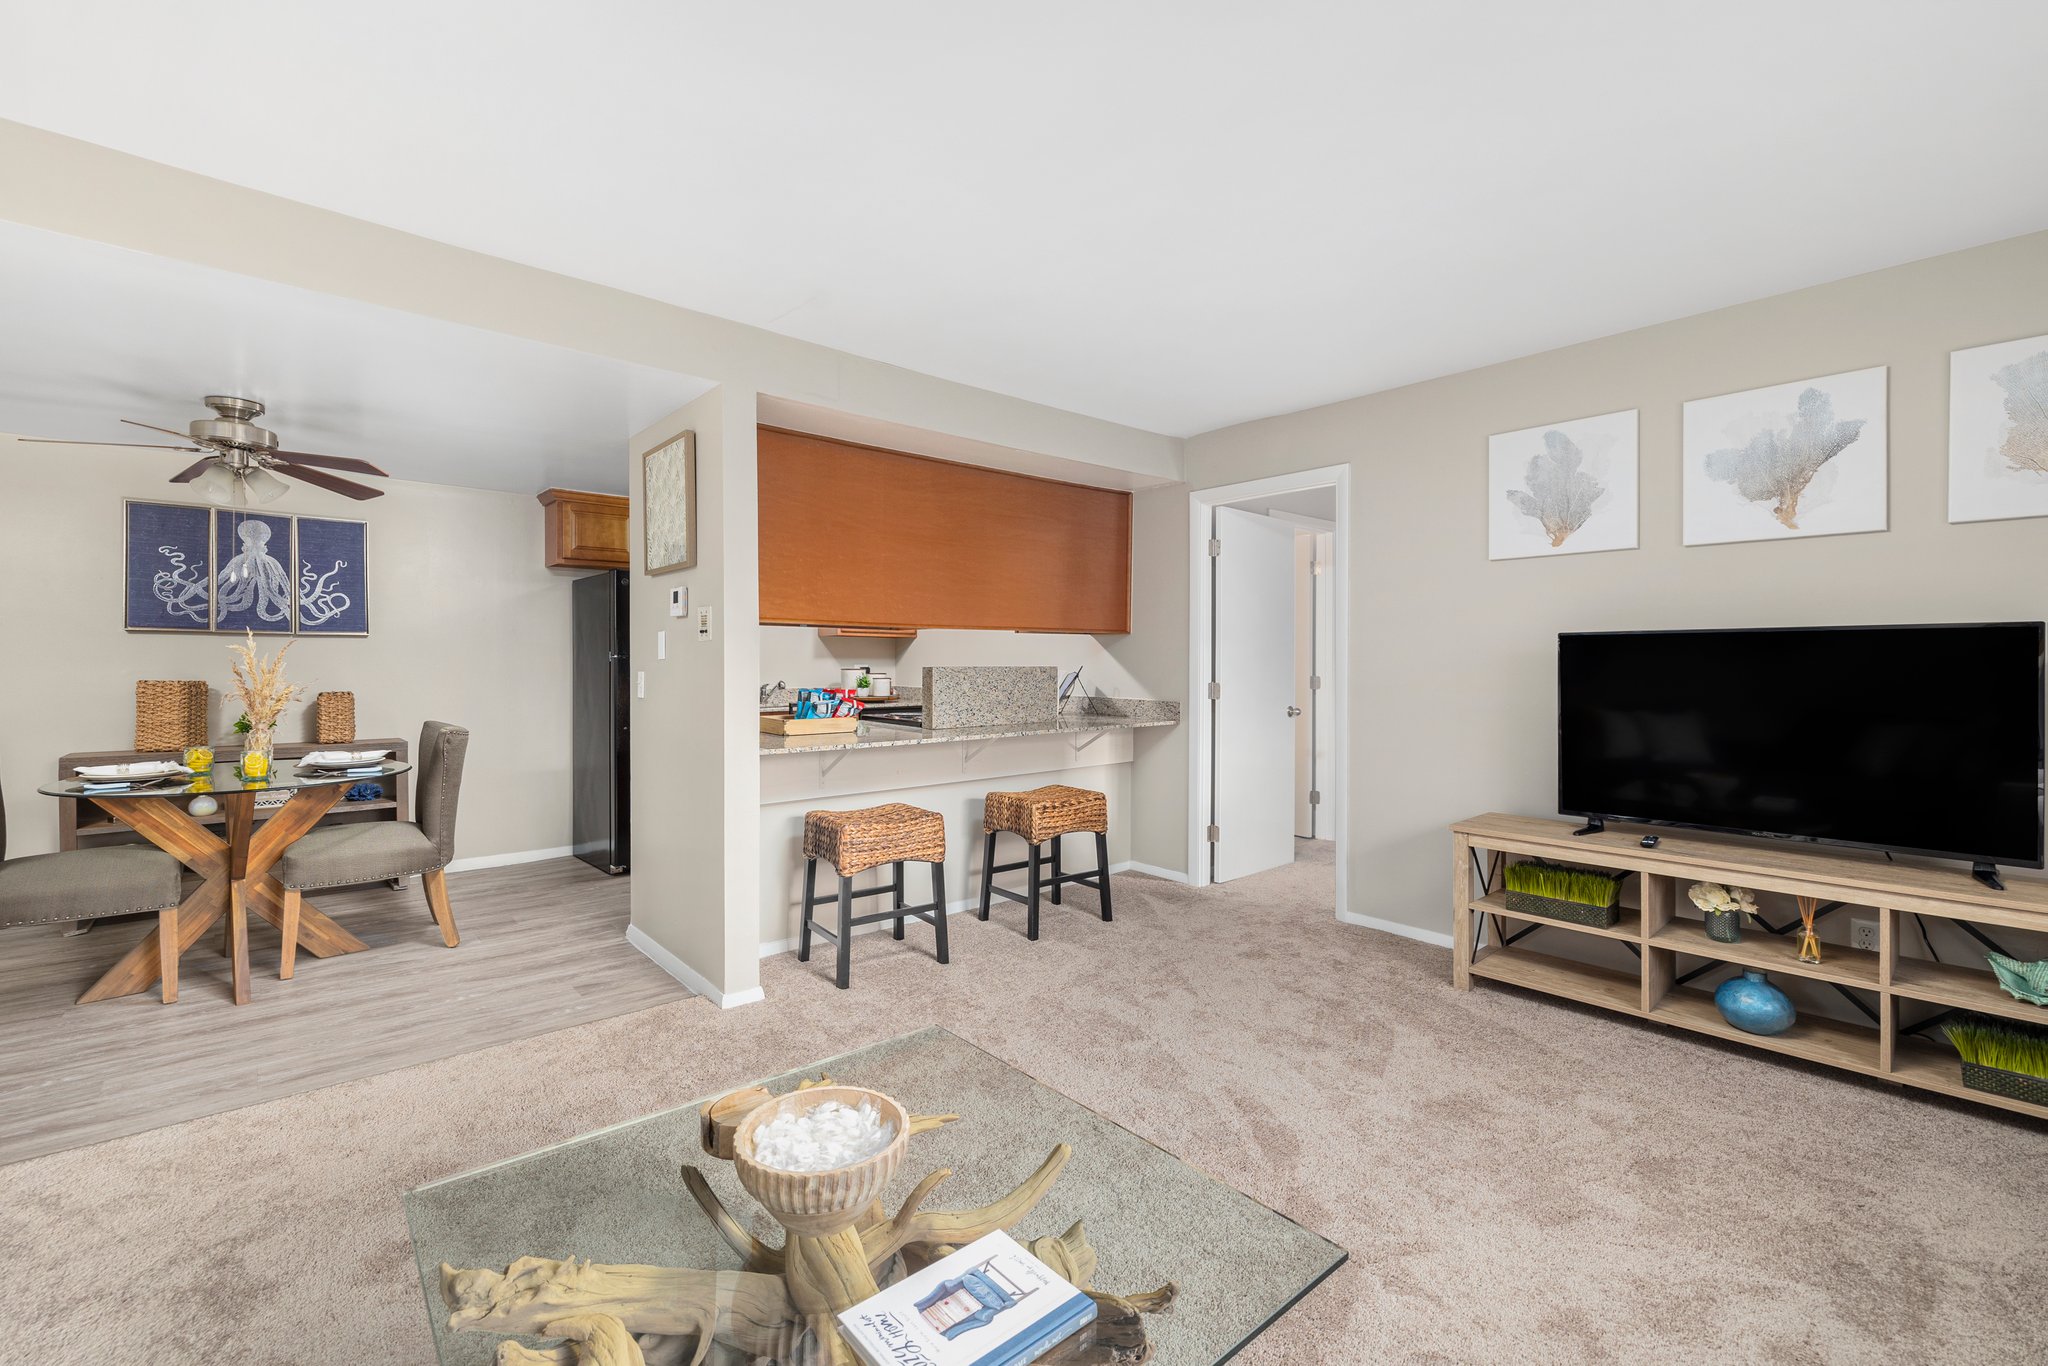 East Bay Village Apartment Homes - Gallery